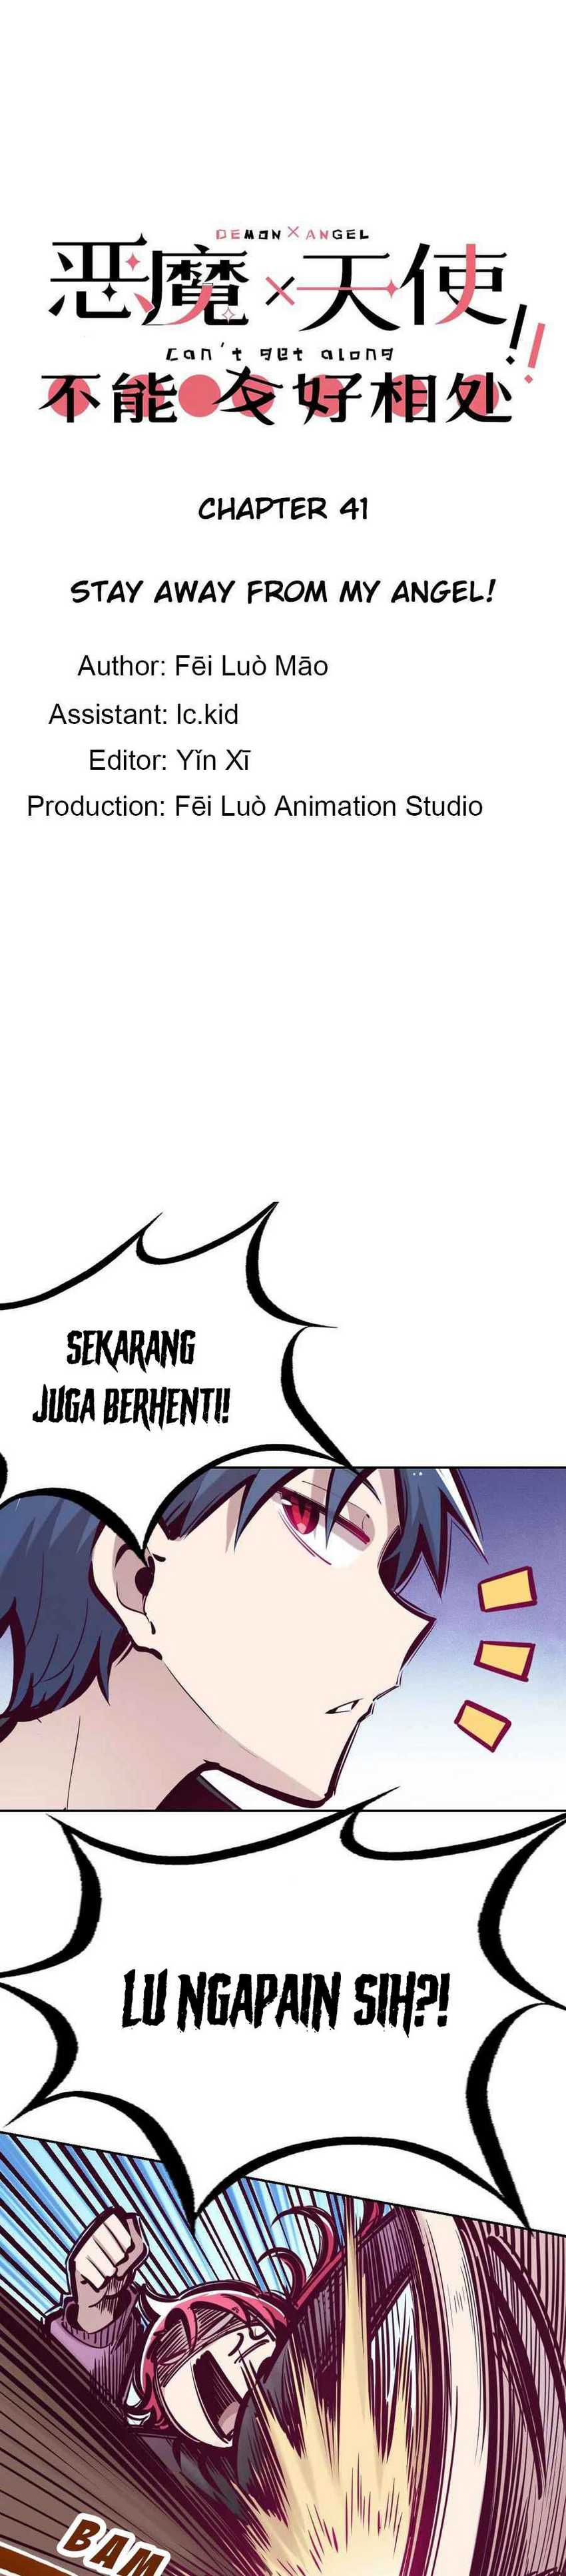 Demon X Angel, Can’t Get Along! Chapter 41